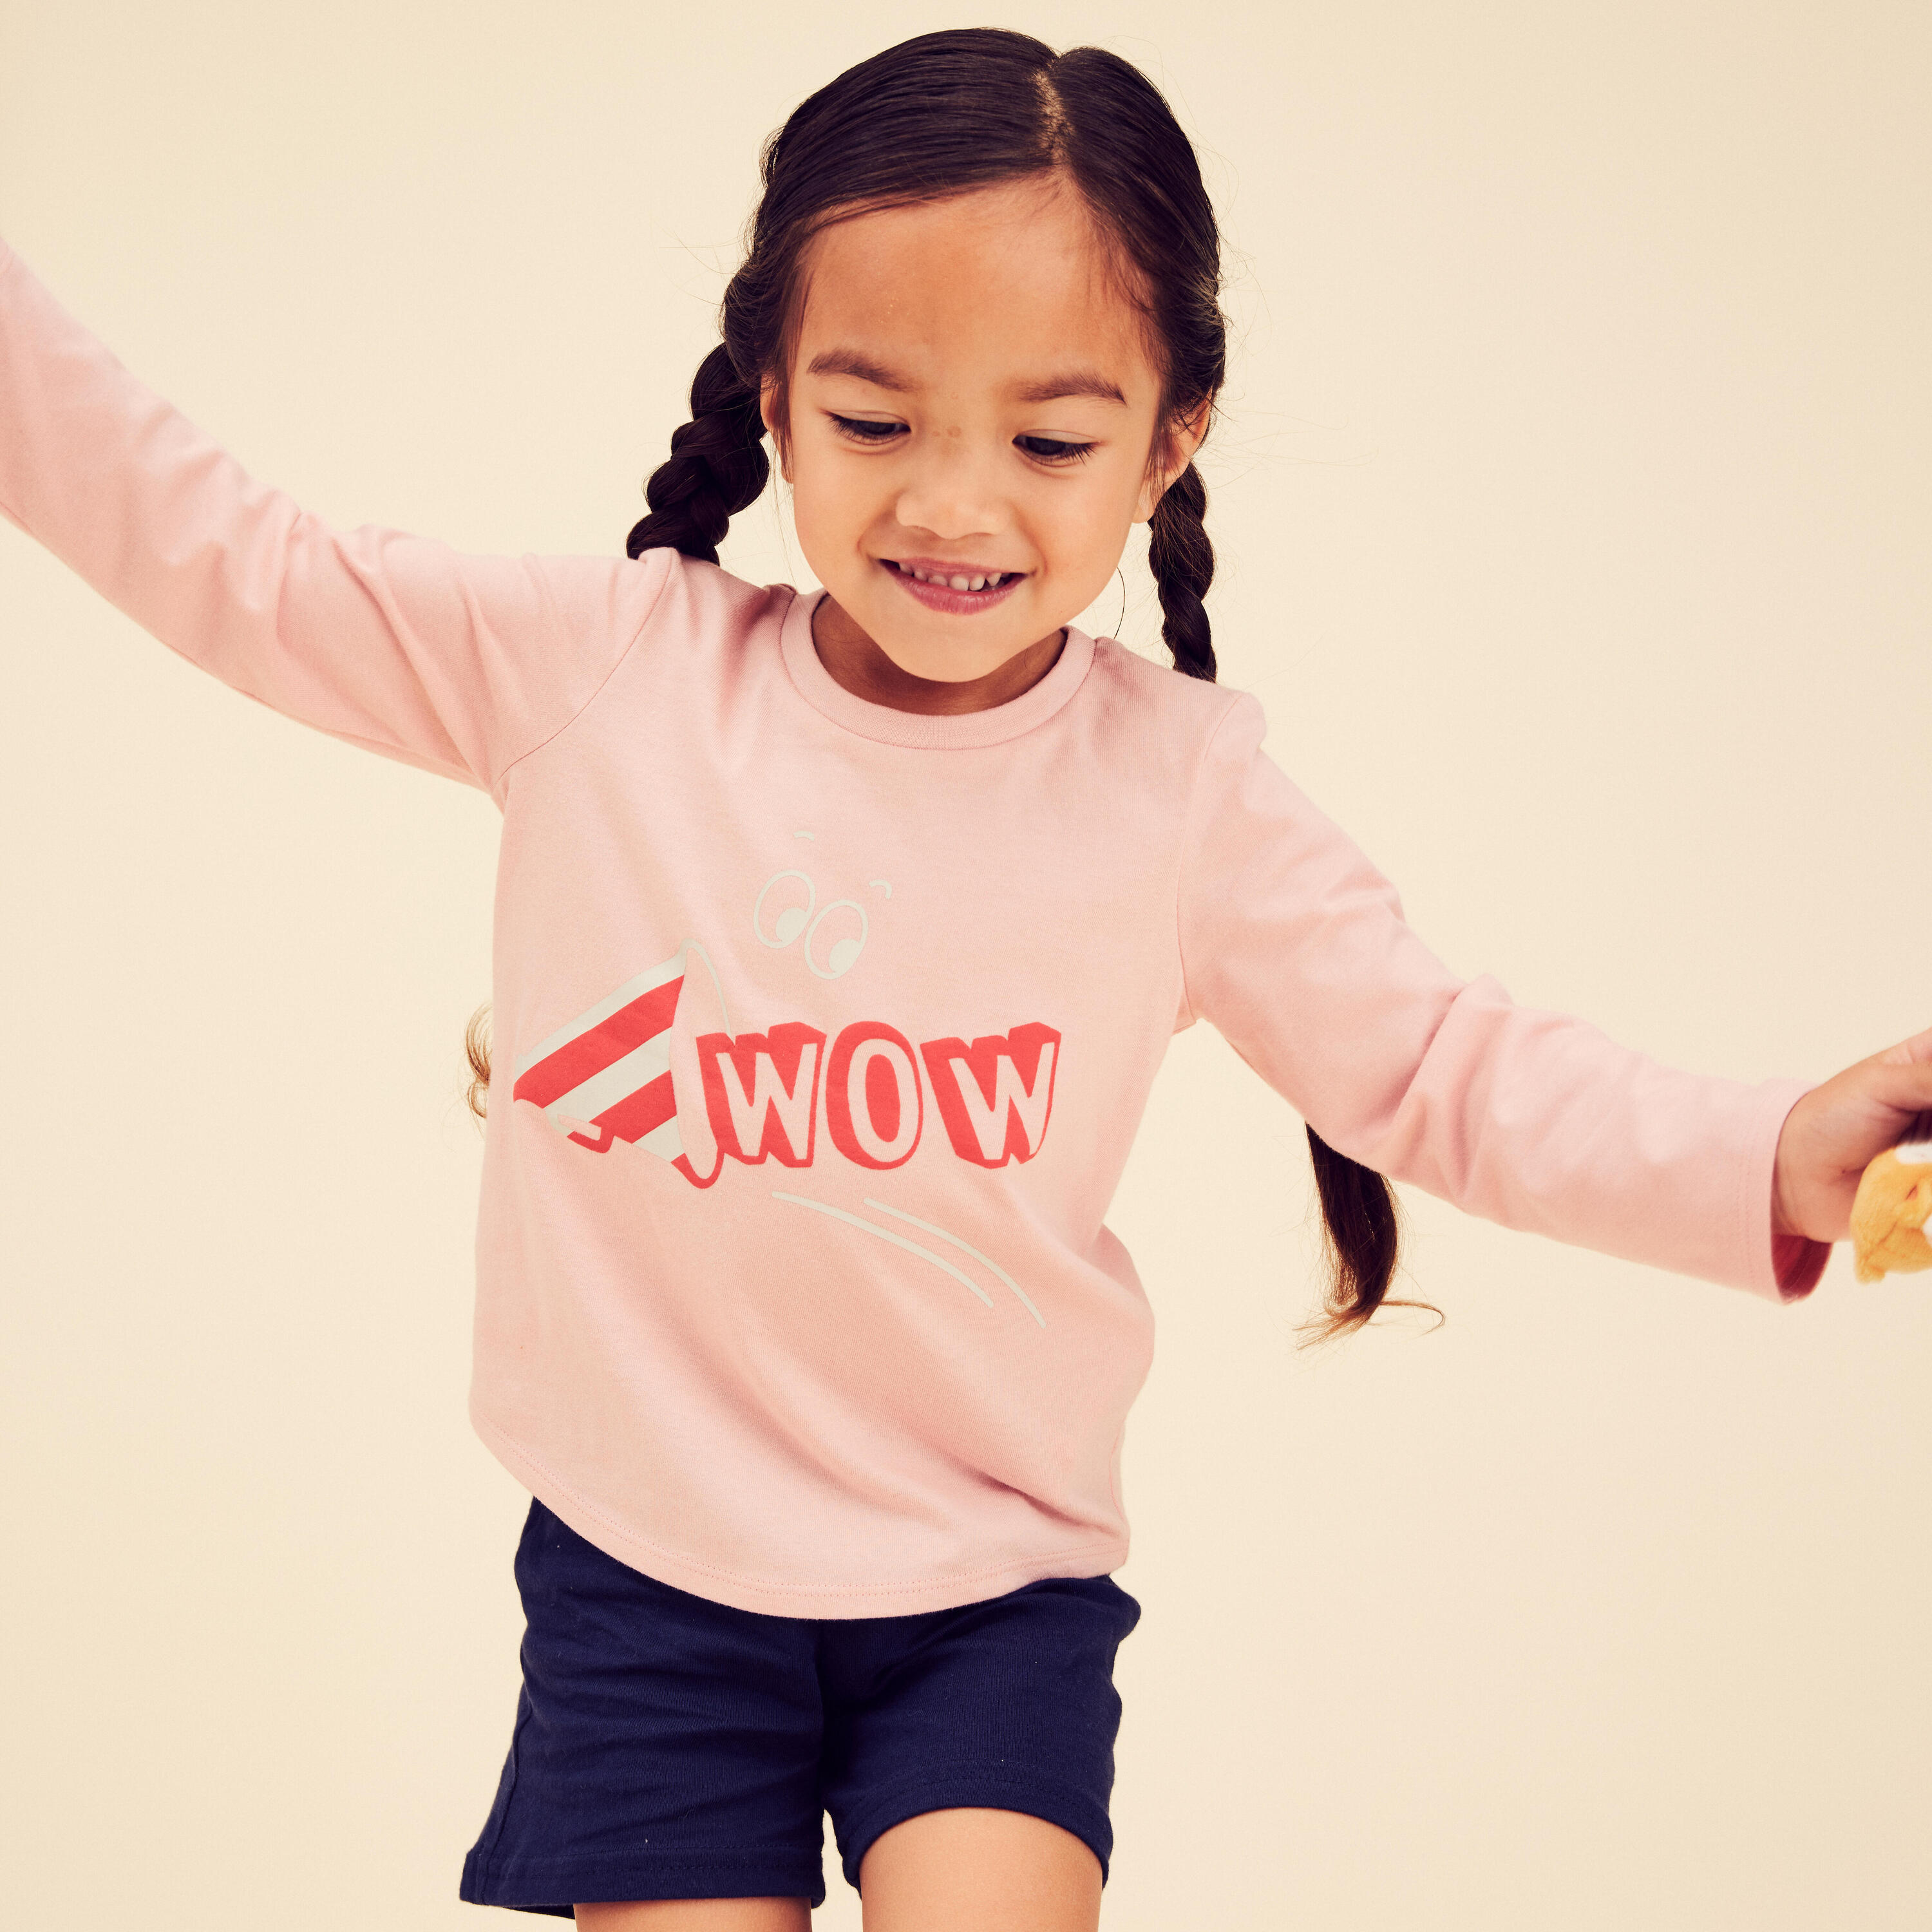 DOMYOS Kids' Basic Cotton Long-Sleeved T-Shirt - Pink with Motifs